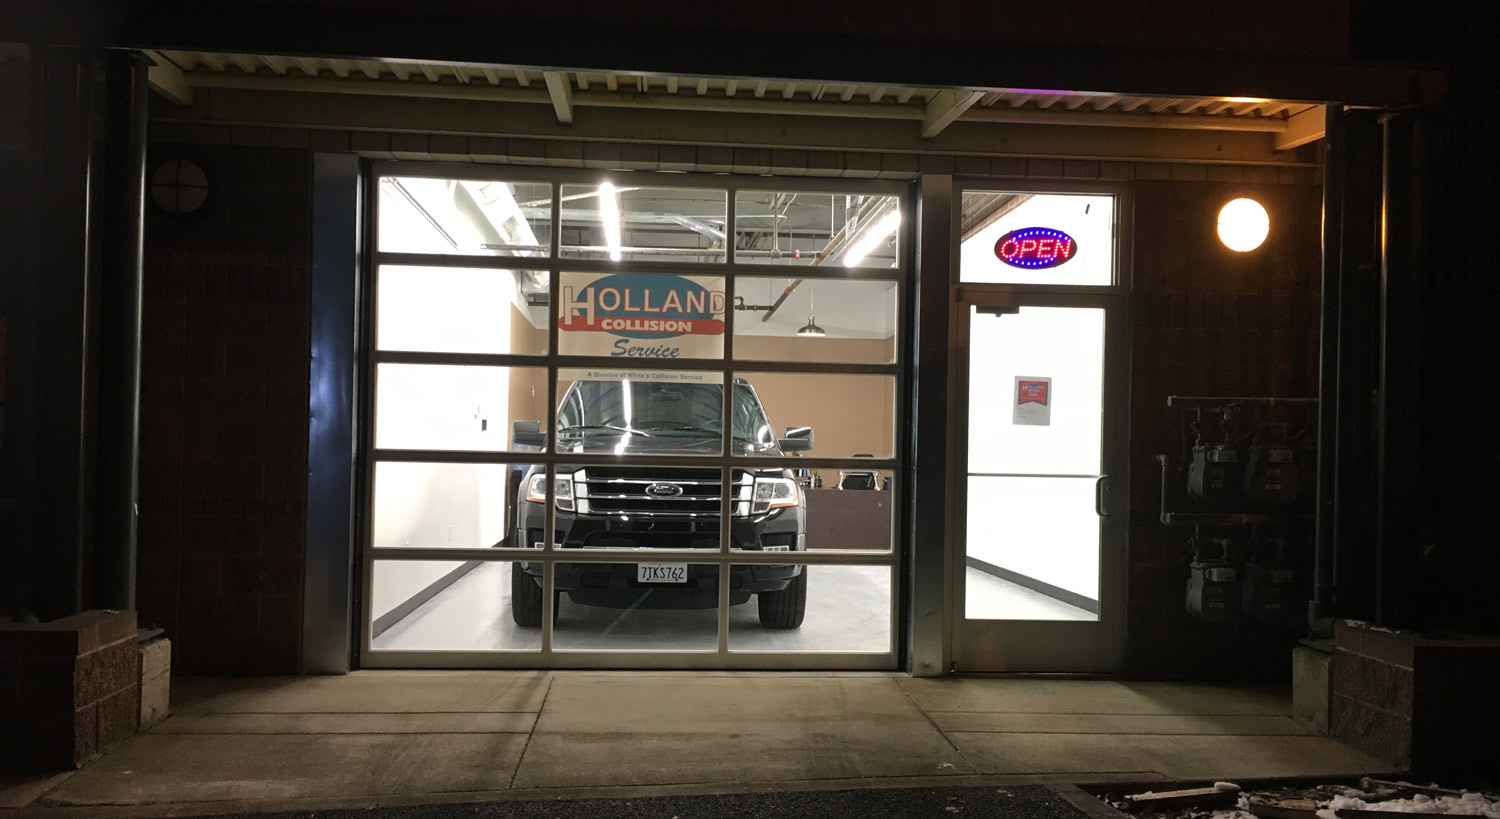 White’s Collision, formerly Holland Collision Service